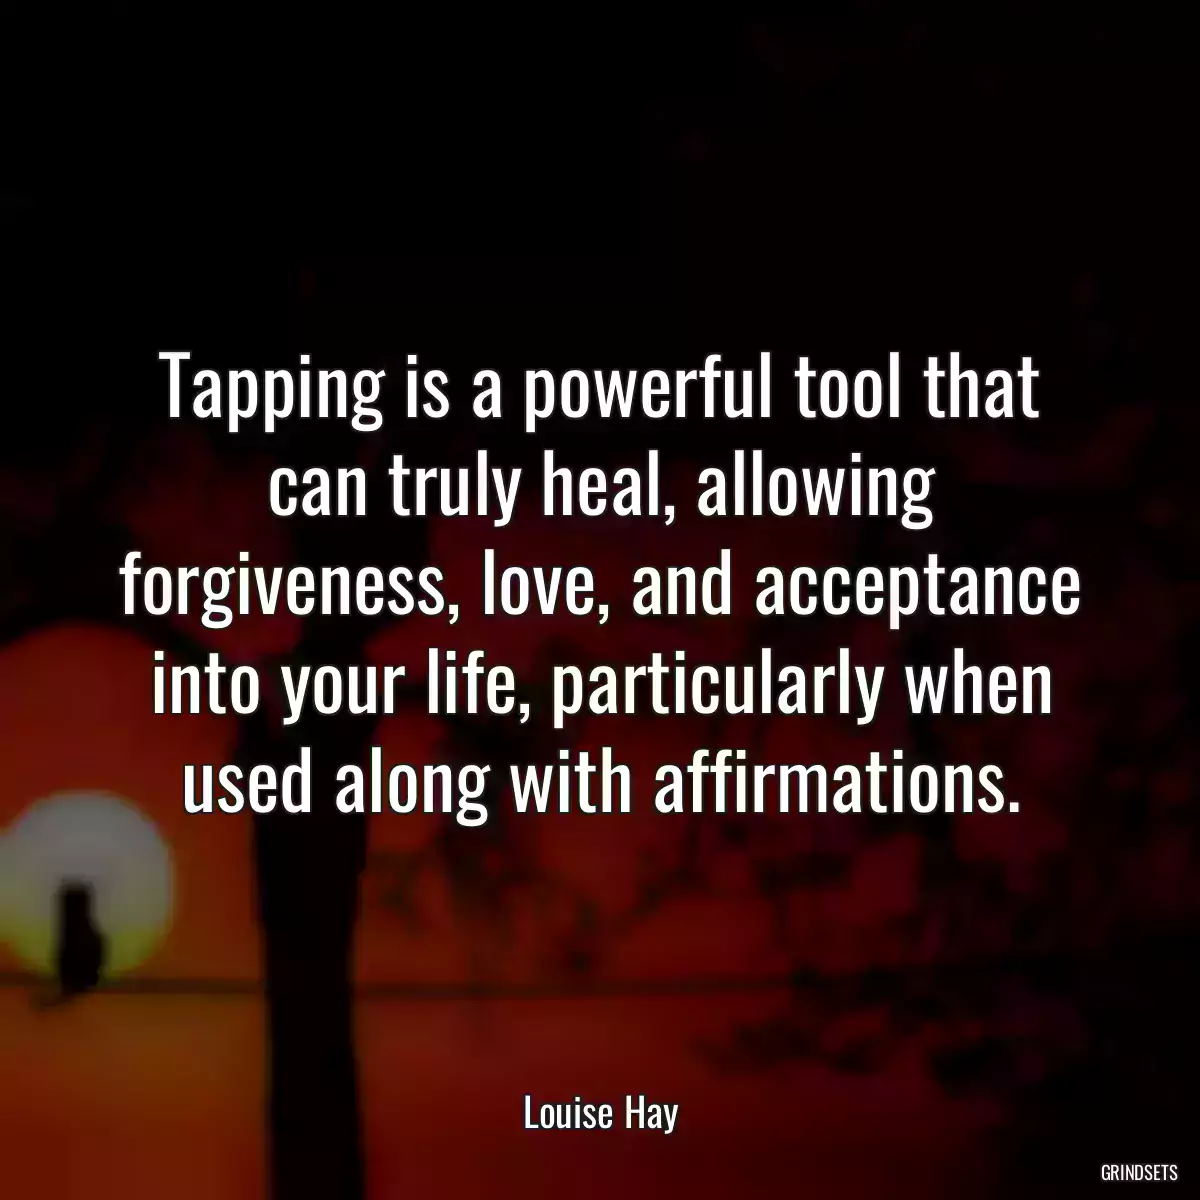 Tapping is a powerful tool that can truly heal, allowing forgiveness, love, and acceptance into your life, particularly when used along with affirmations.